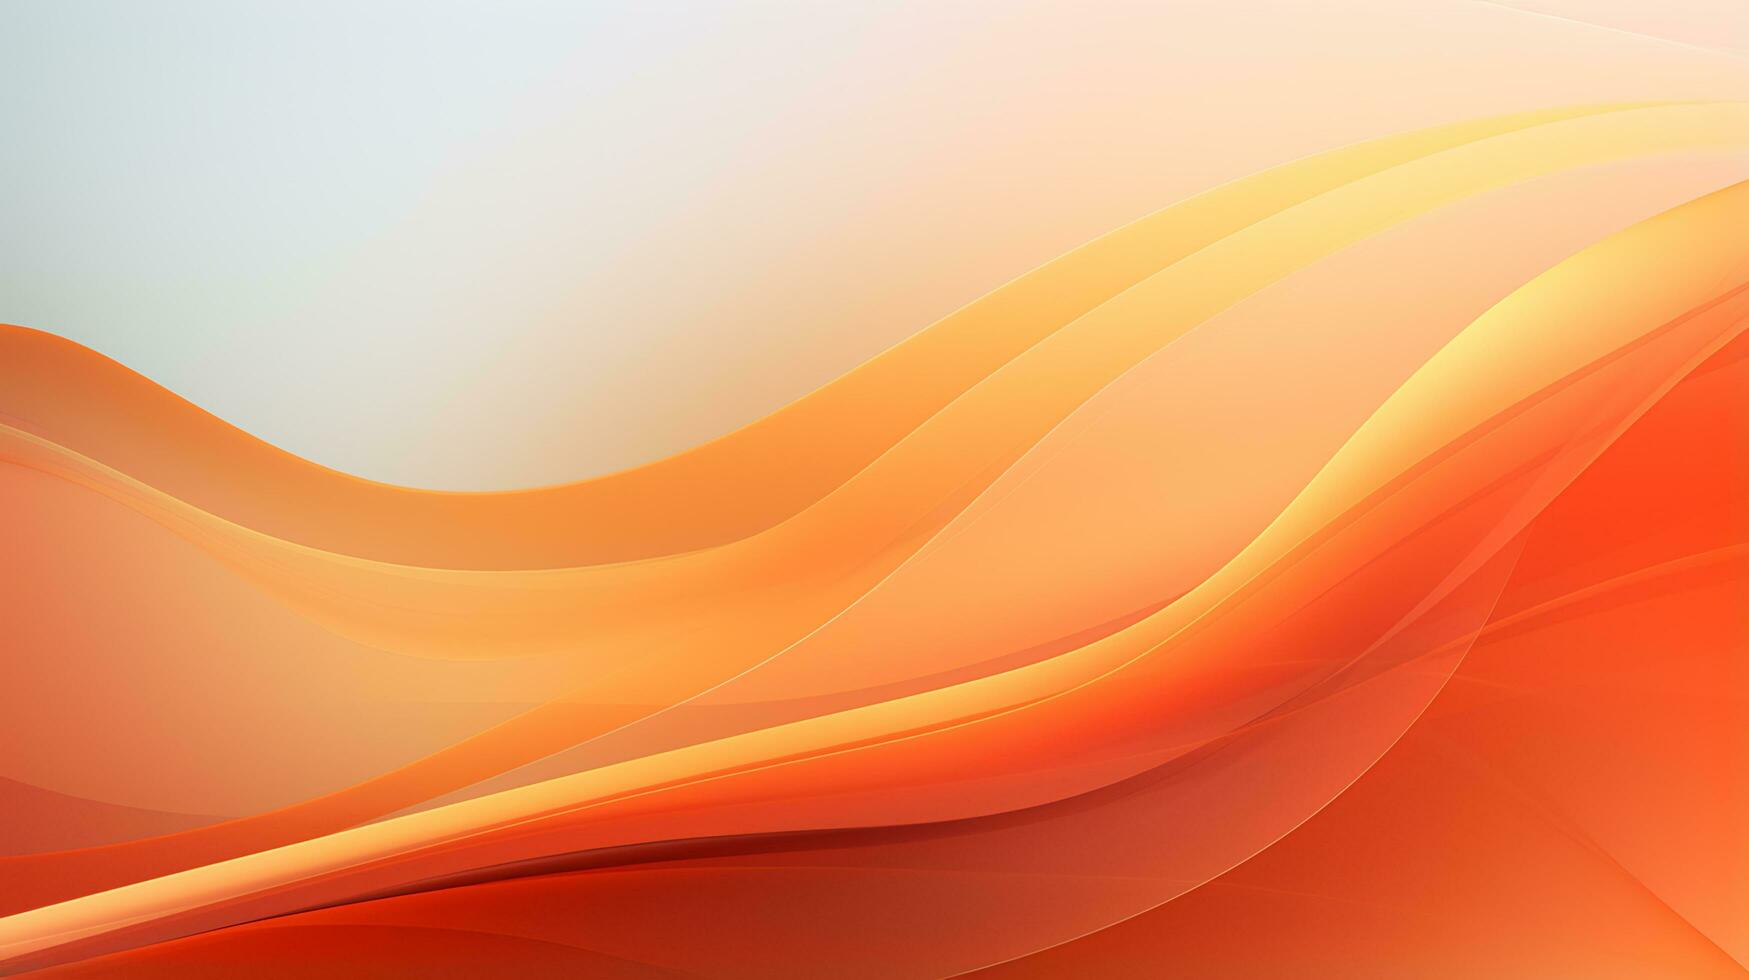 3D orange abstract wave background photo